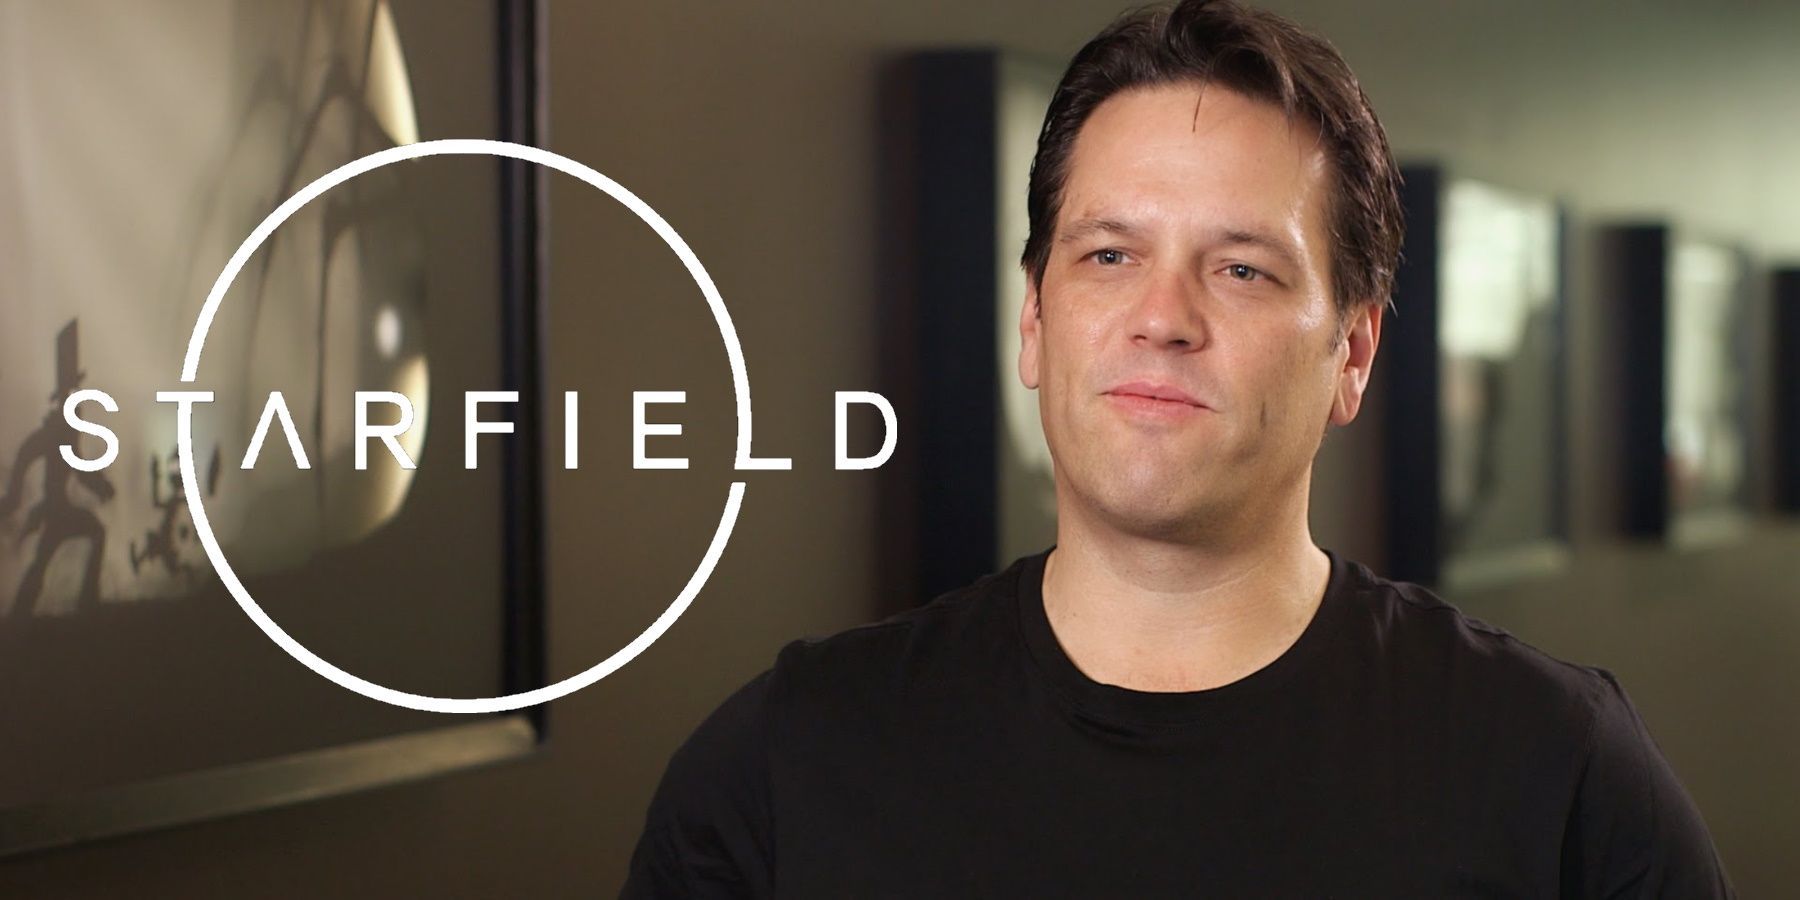 First Starfield mod shows Phil Spencer when turning on the